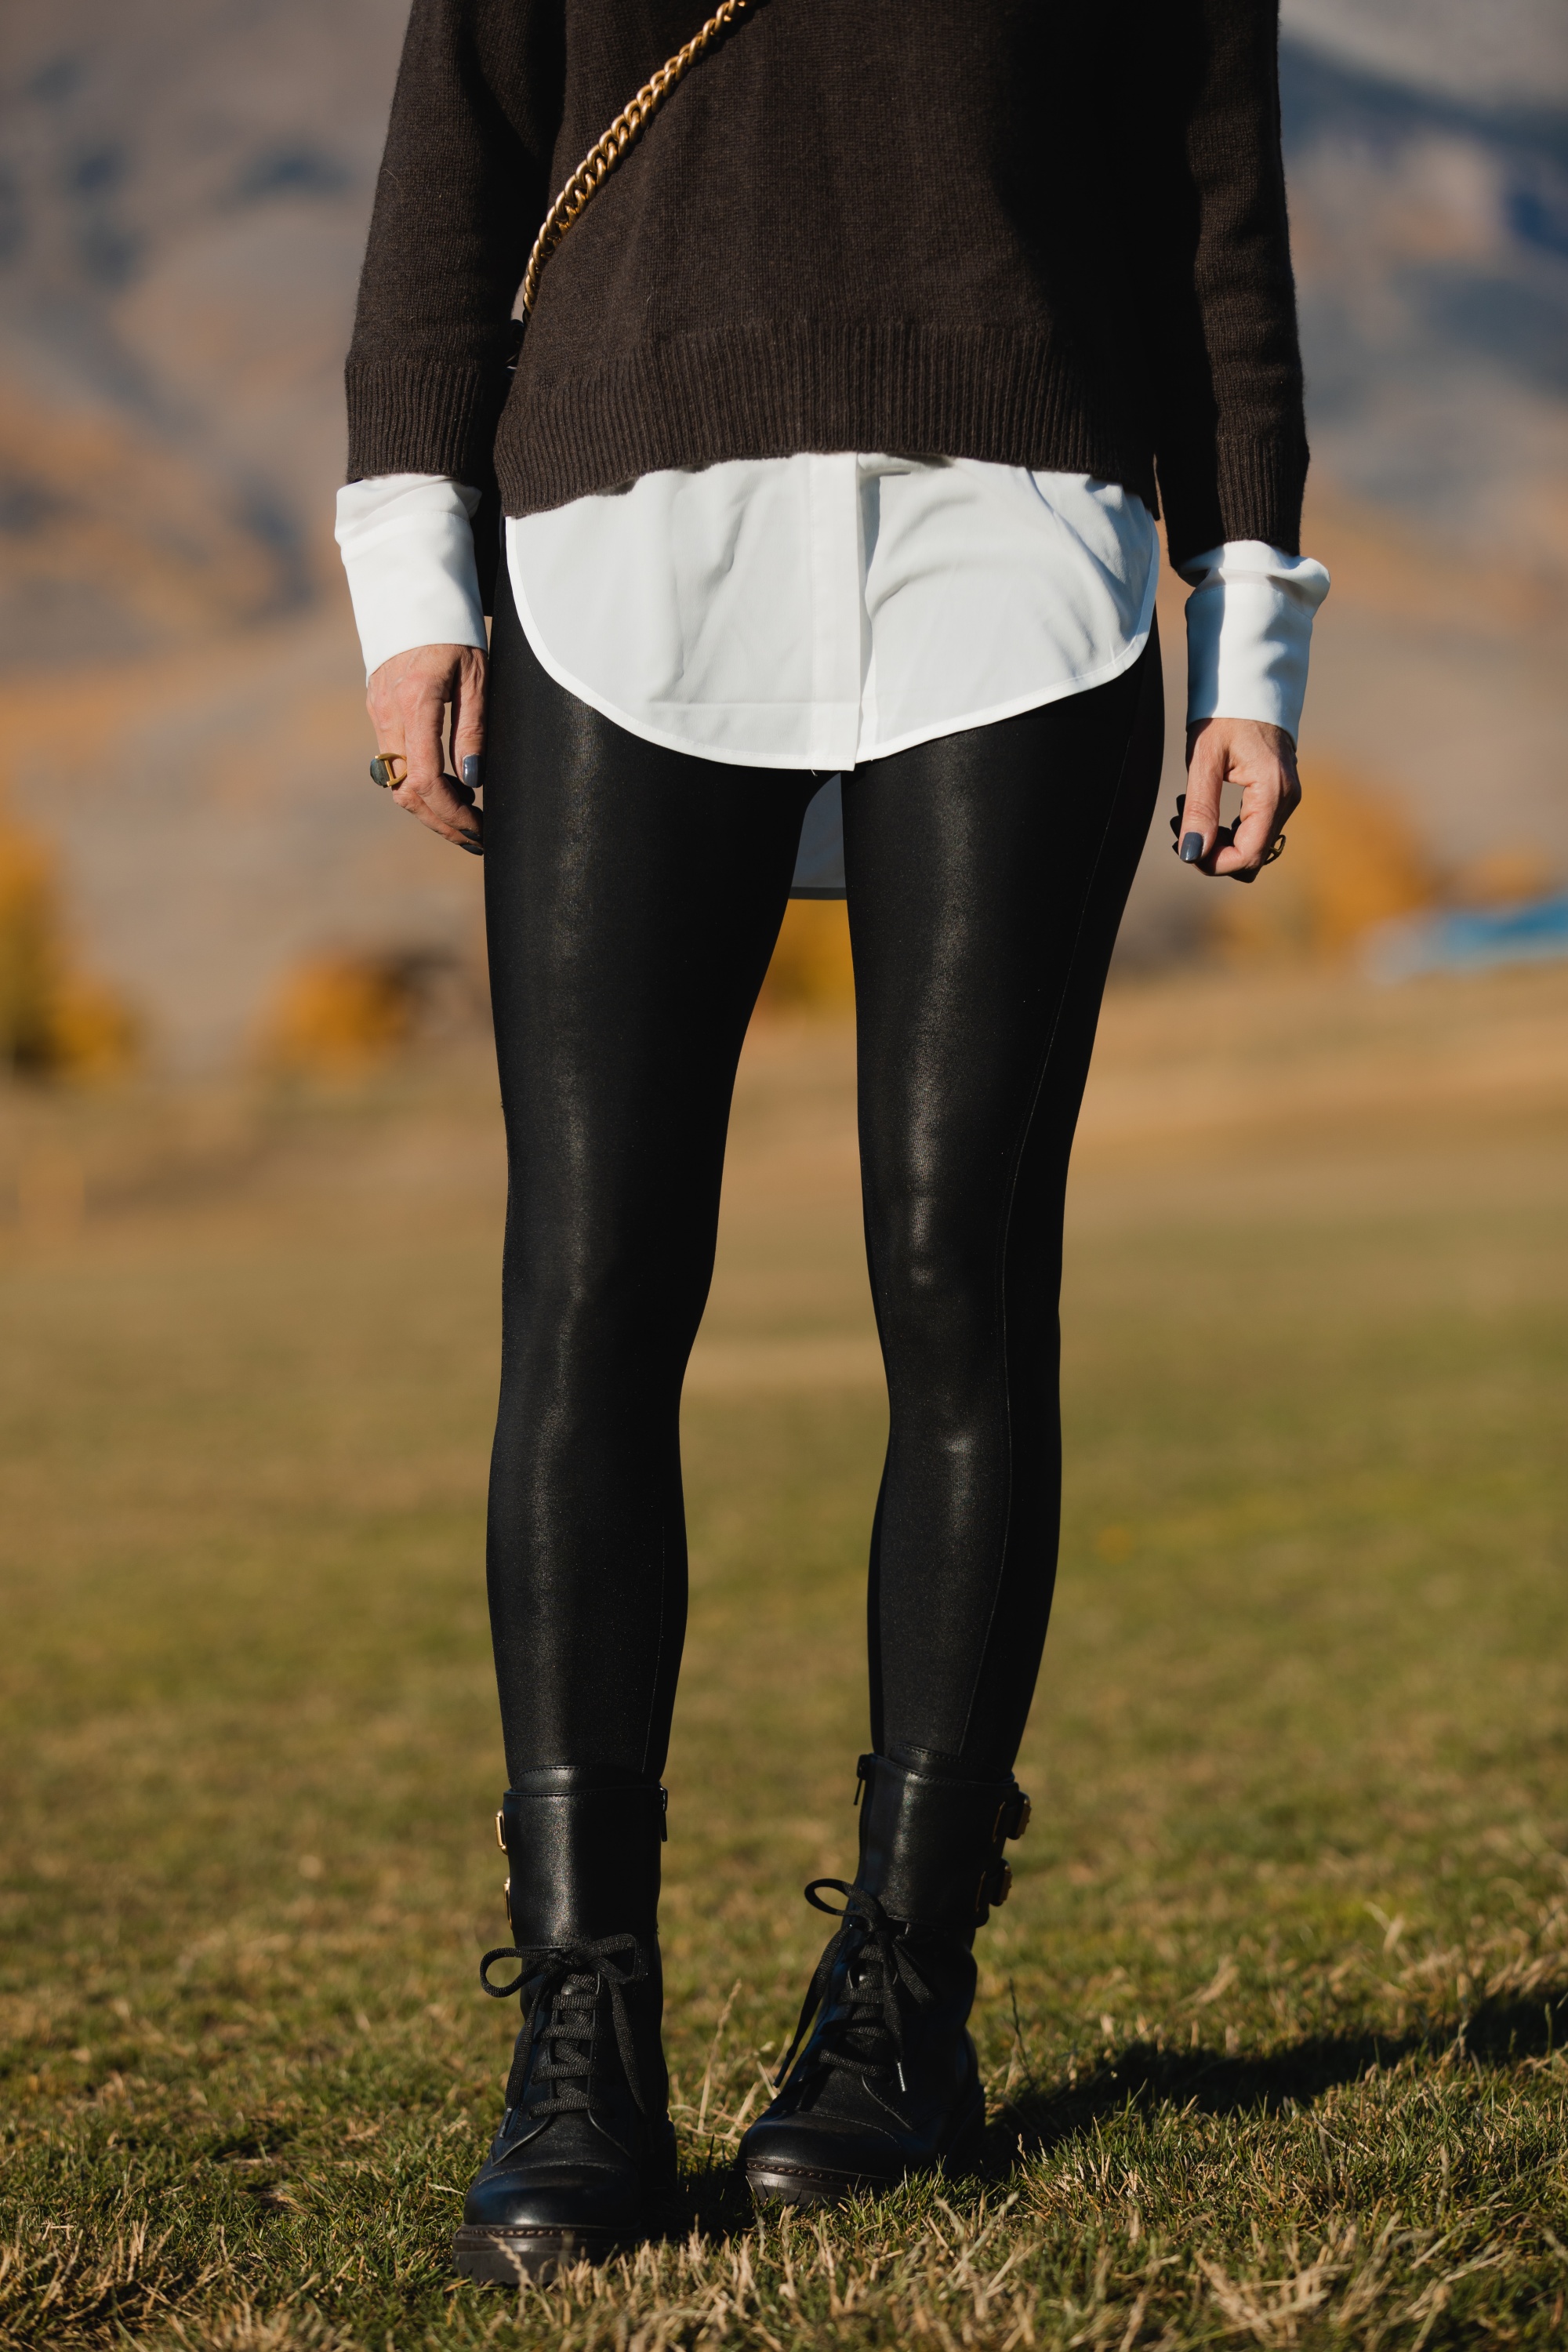 Layered Sweater, Erin Busbee of Busbee Style wearing a brown layered sweater by Brochu Walker, Spanx faux leather leggings, See by Chloe combat boots, and black Chanel boy bag in Telluride, Colorado